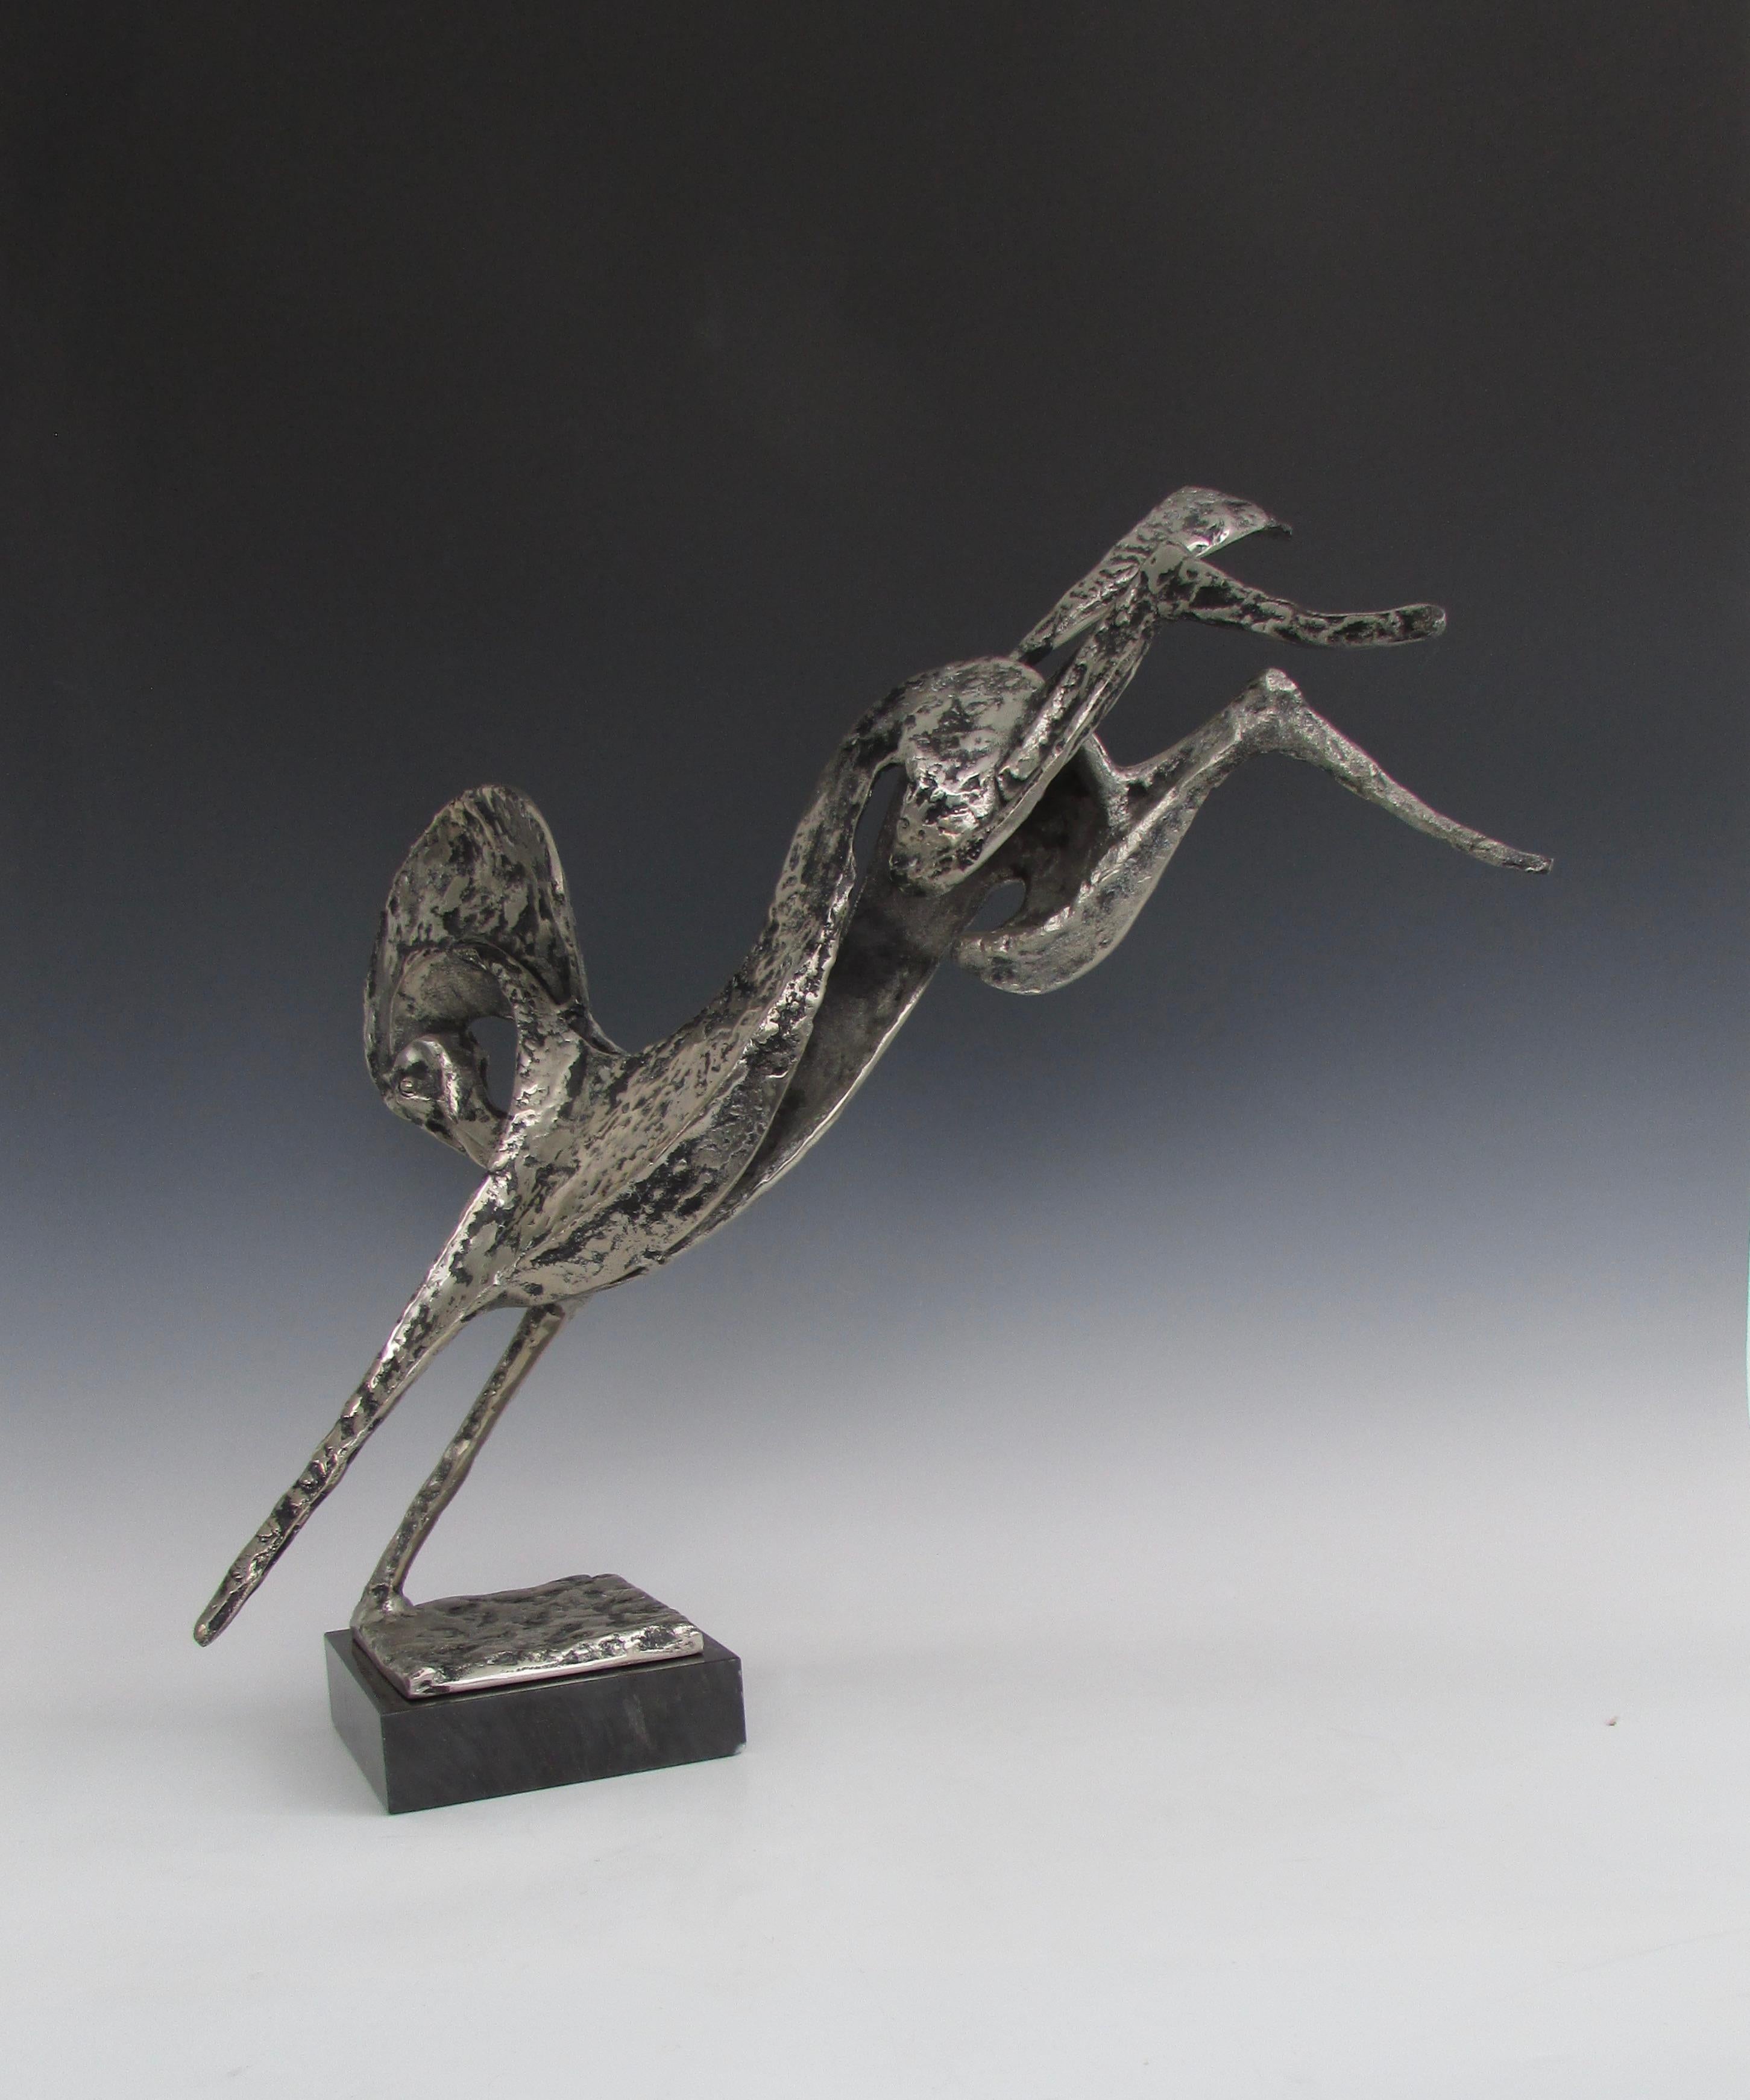 Beautifully scaled cast and plated sculpture of rearing horse on onyx base.